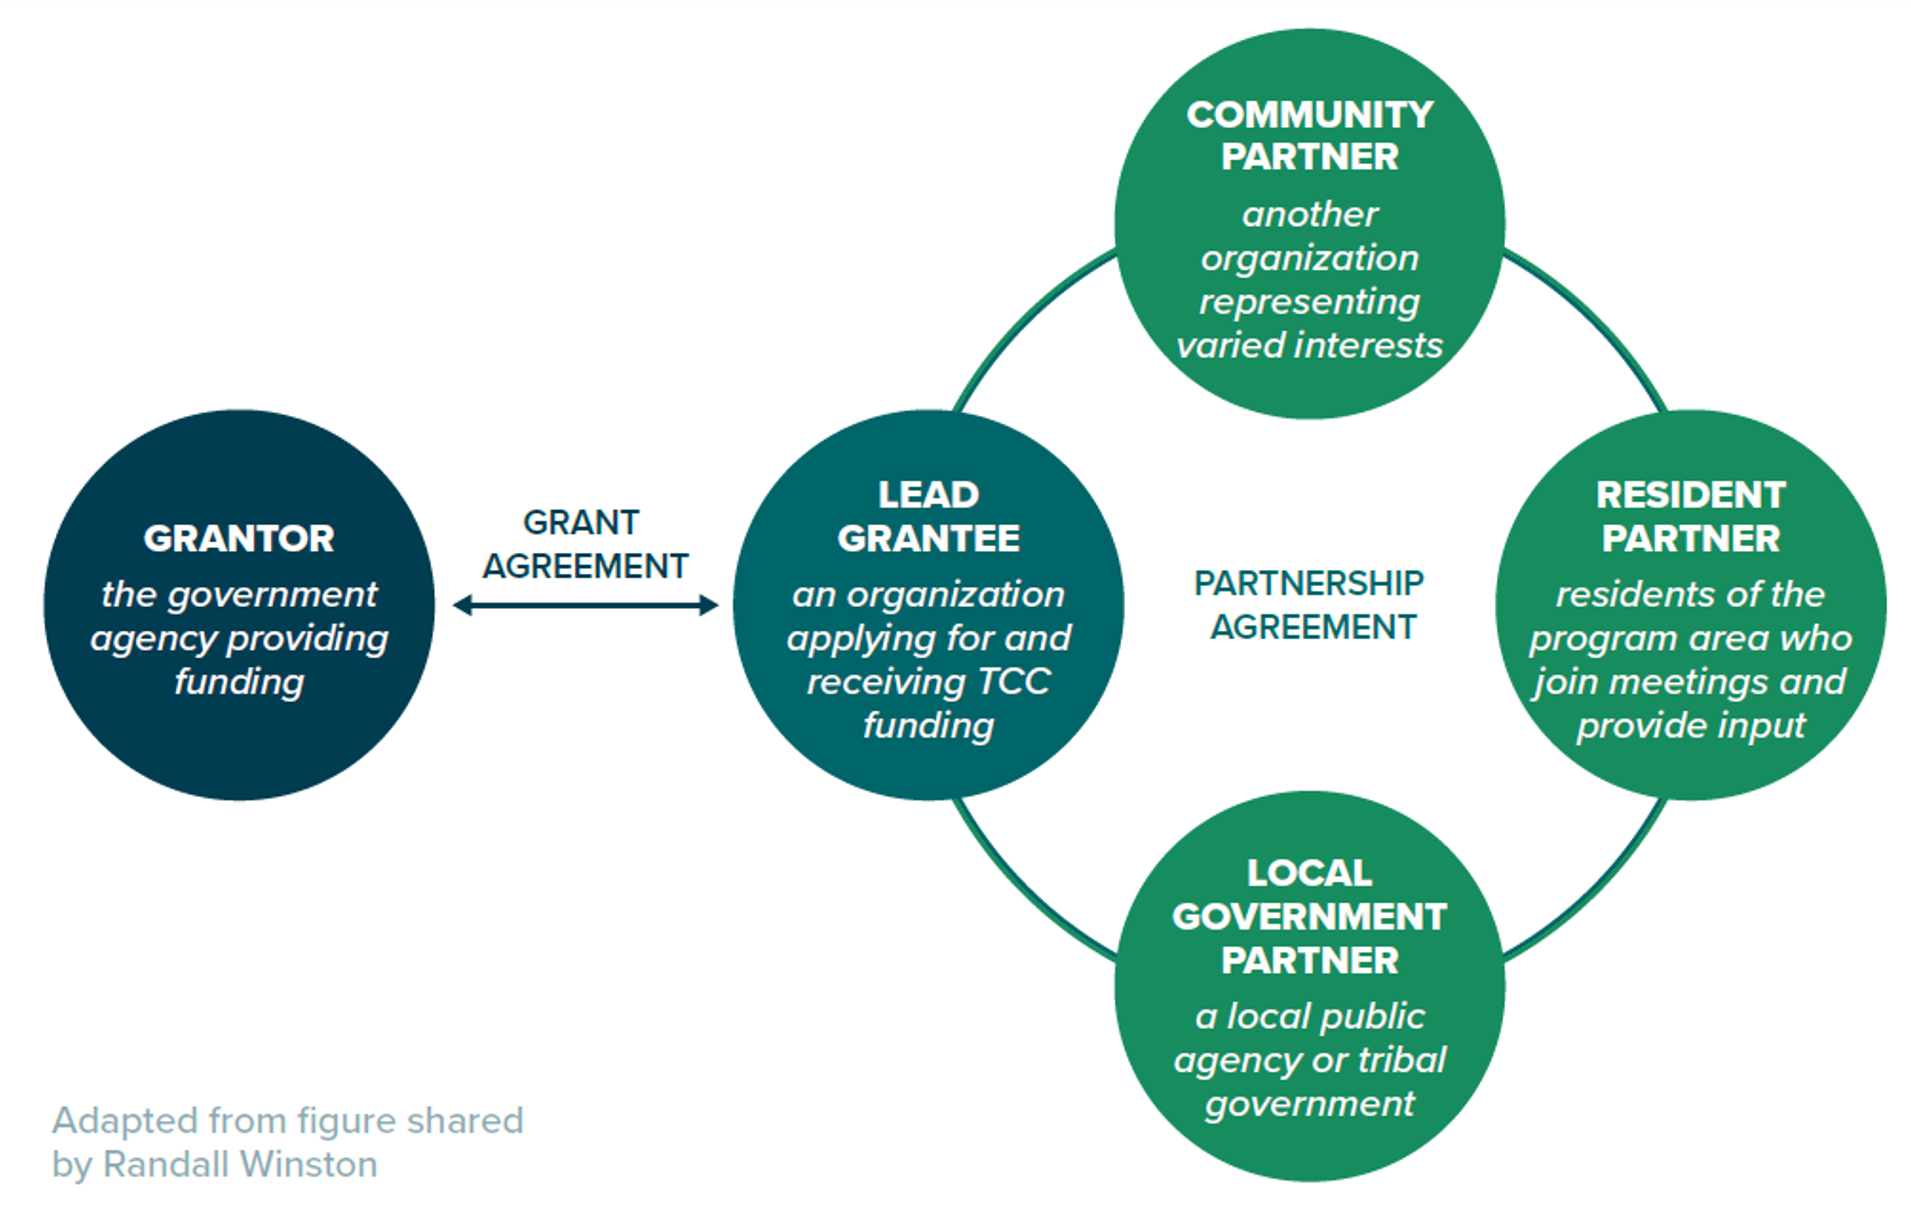 Diagram outlining the components of a collaborative governance structure. A collaborative governance structure involves a grant agreement between the grantor and the lead grantee and a partnership agreement between the lead grantee, community partner, resident partner, and local government partner.